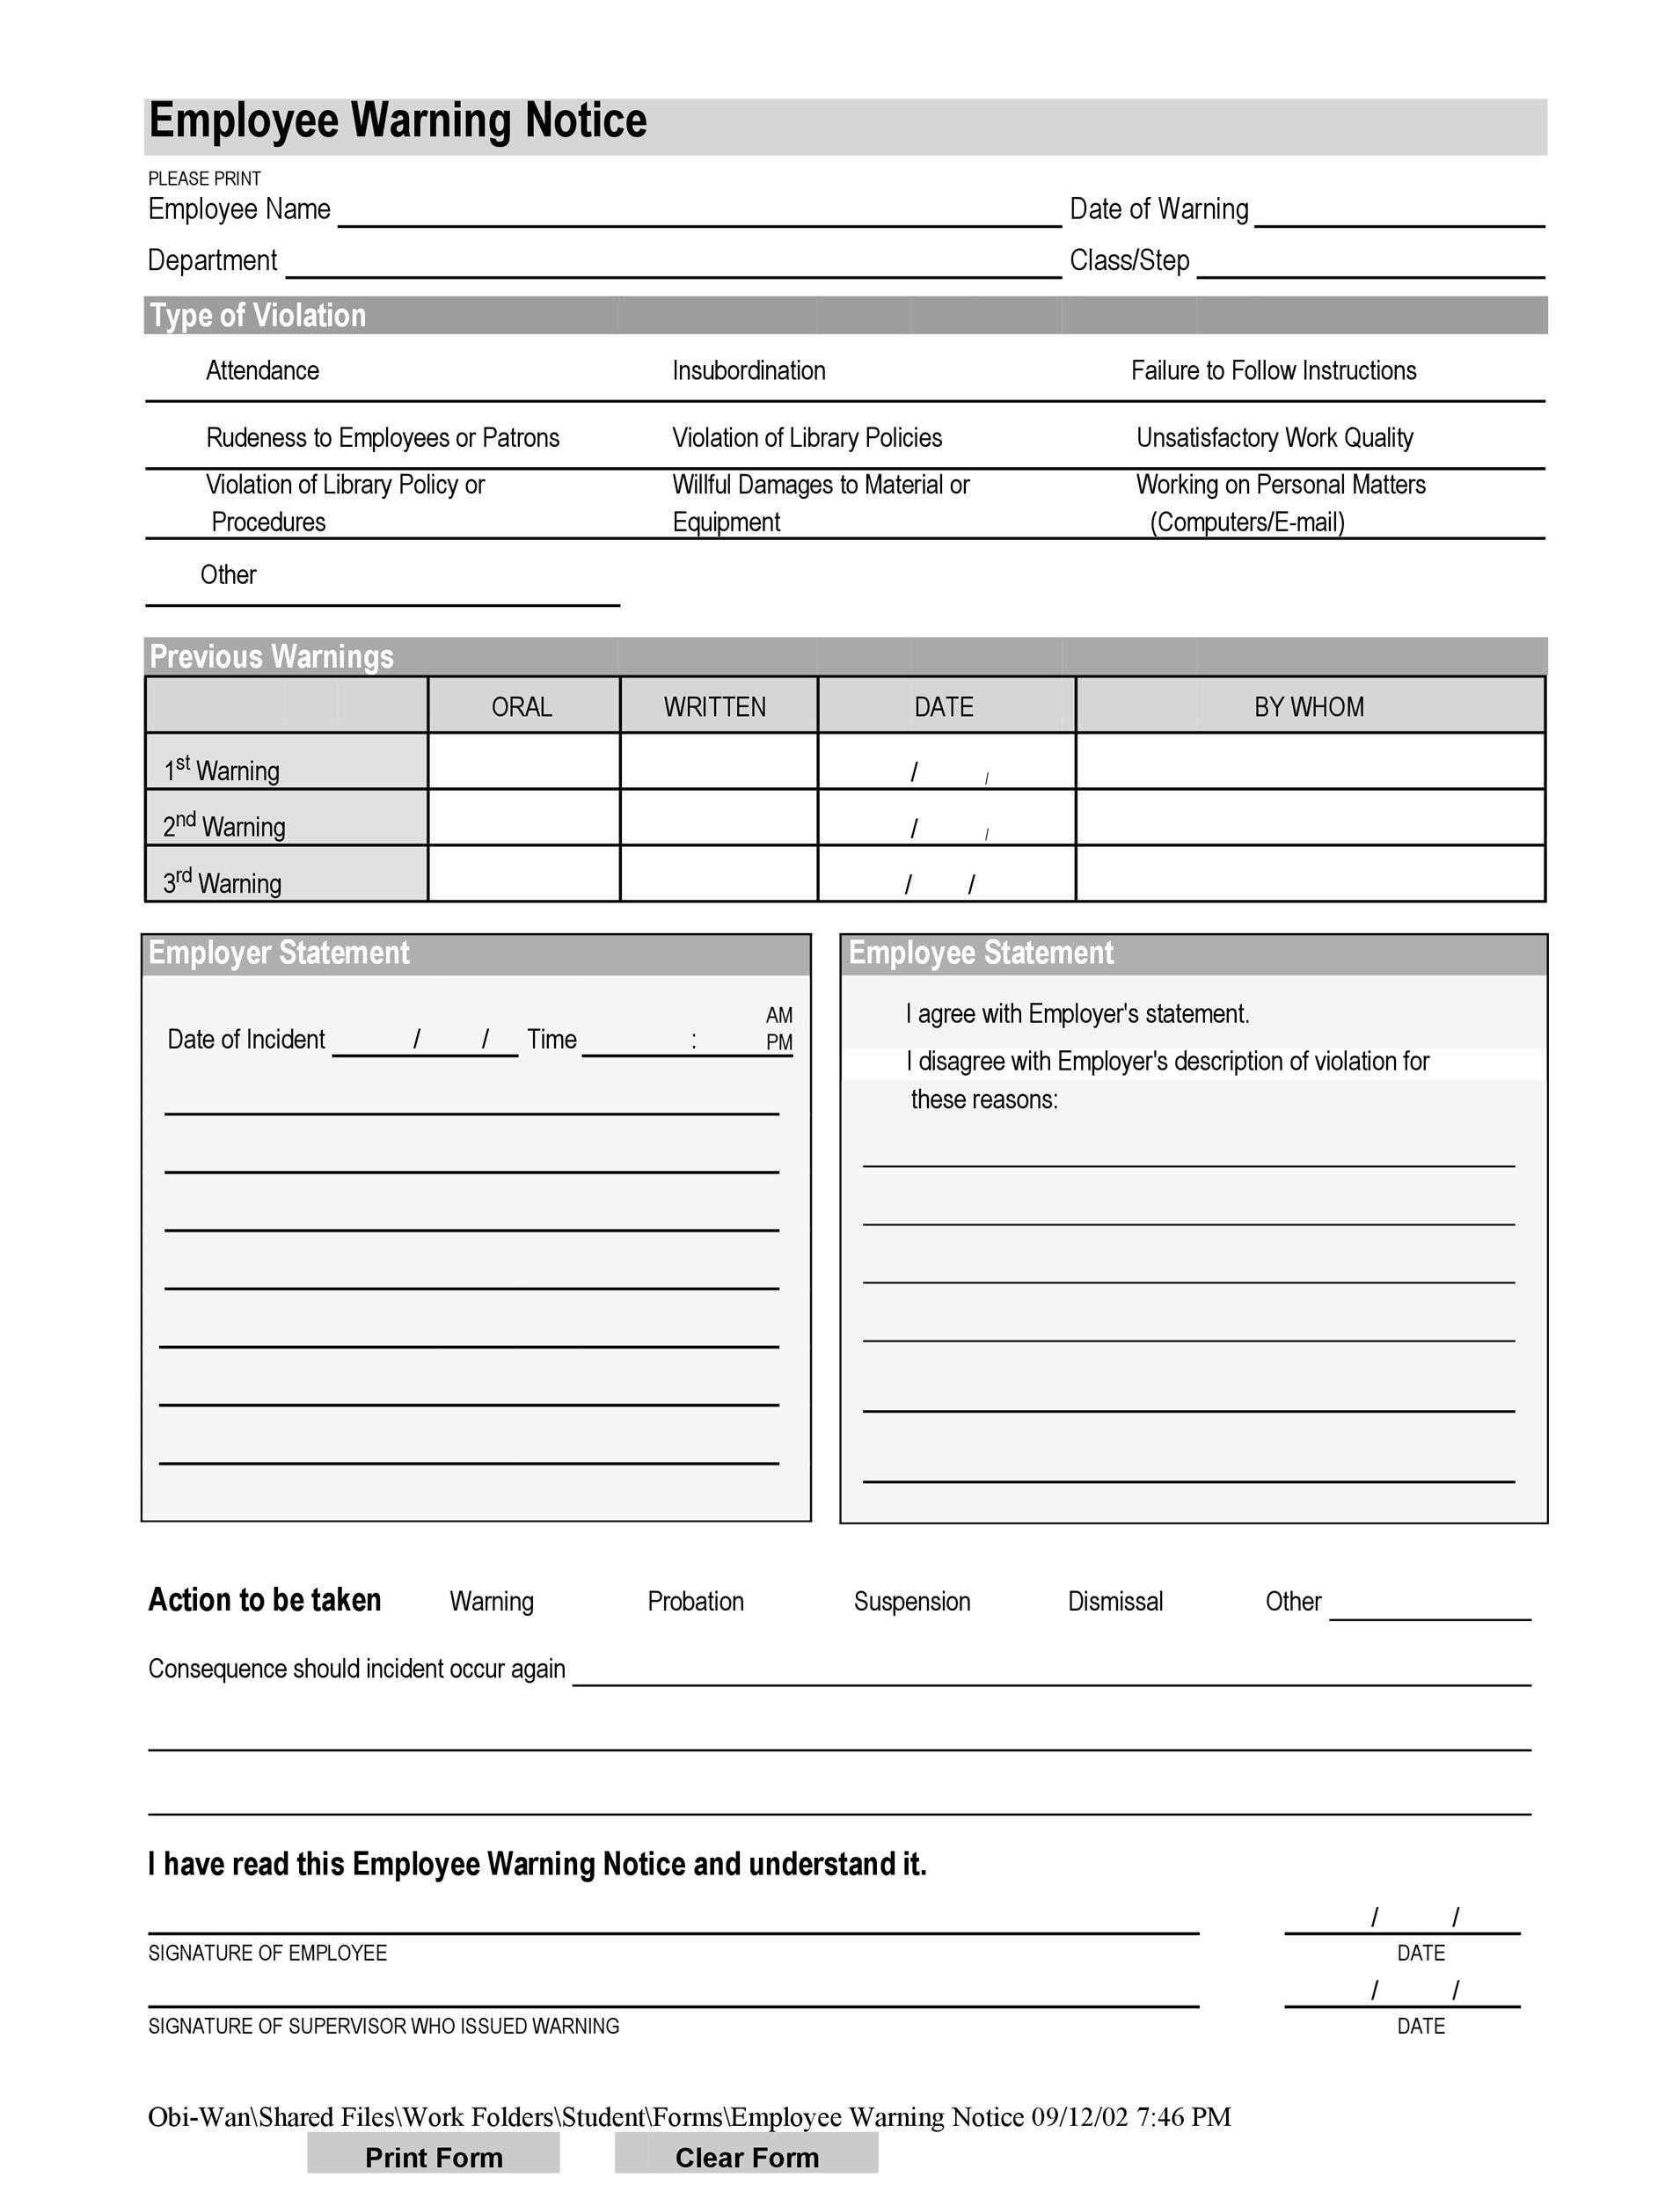 employee-warning-notice-download-56-free-templates-forms